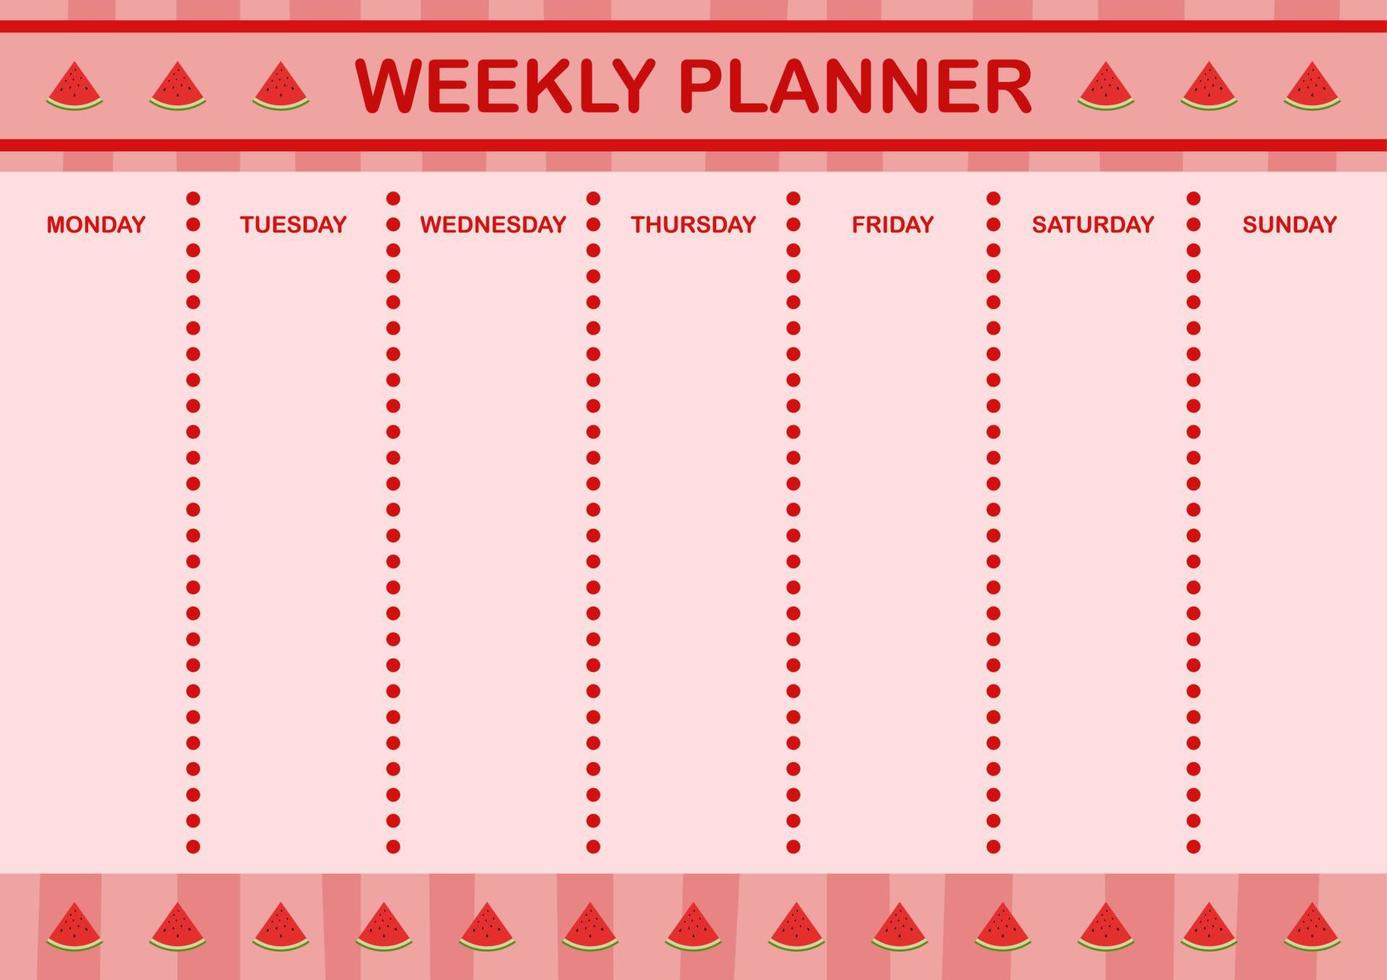 Daily and weekly planner with Watermelon vector